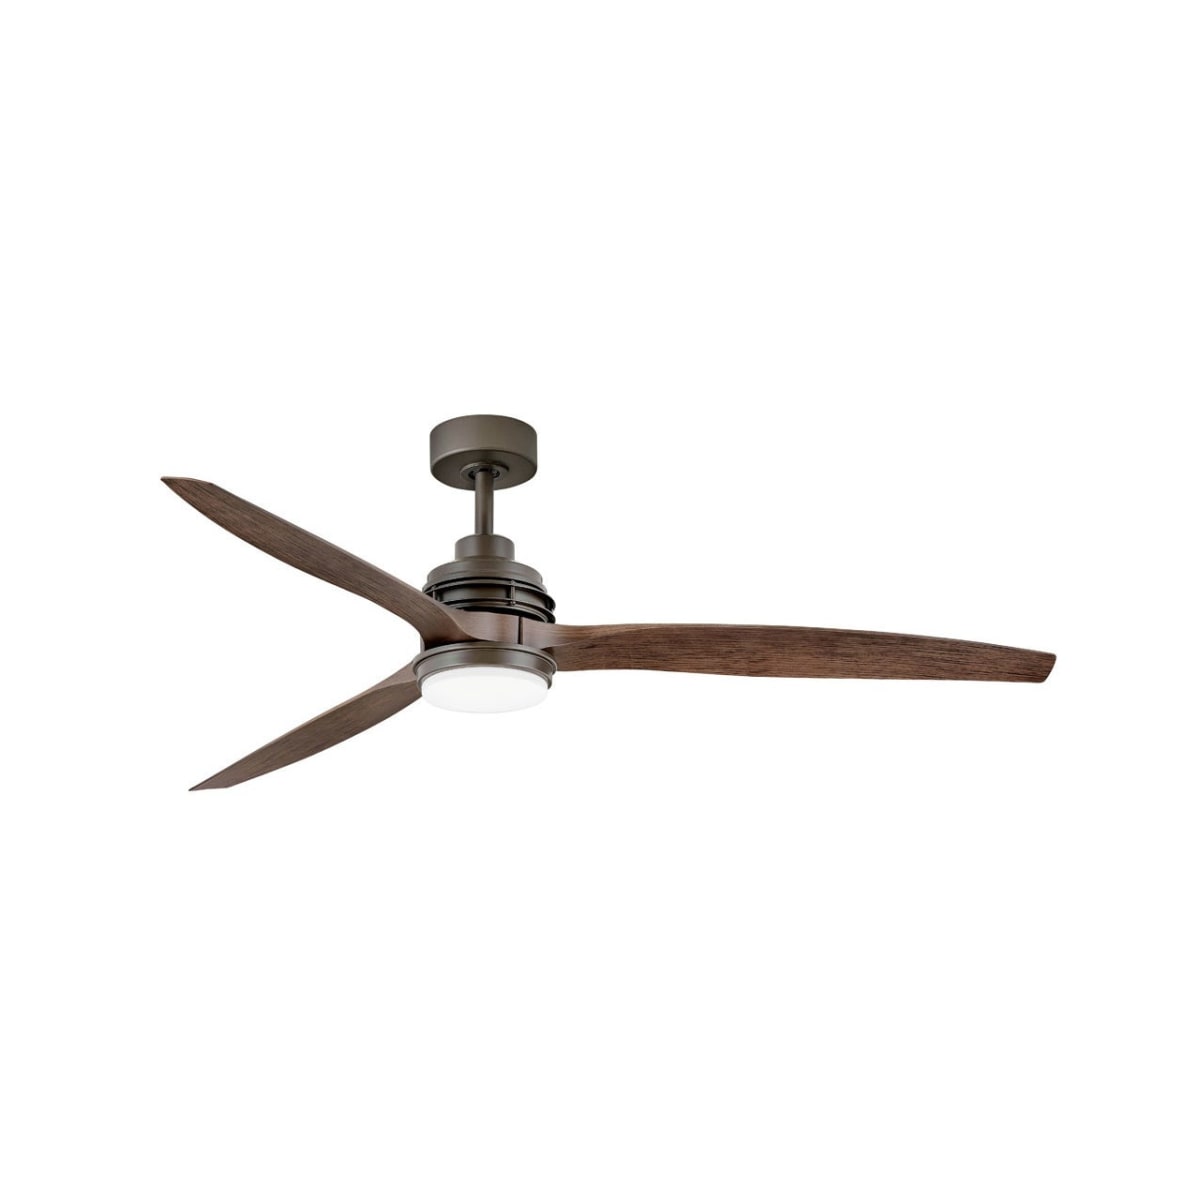 60 in Brushed Nickel Ceiling Fan 3 Blades Integrated LED Light Indoor Outdoor 